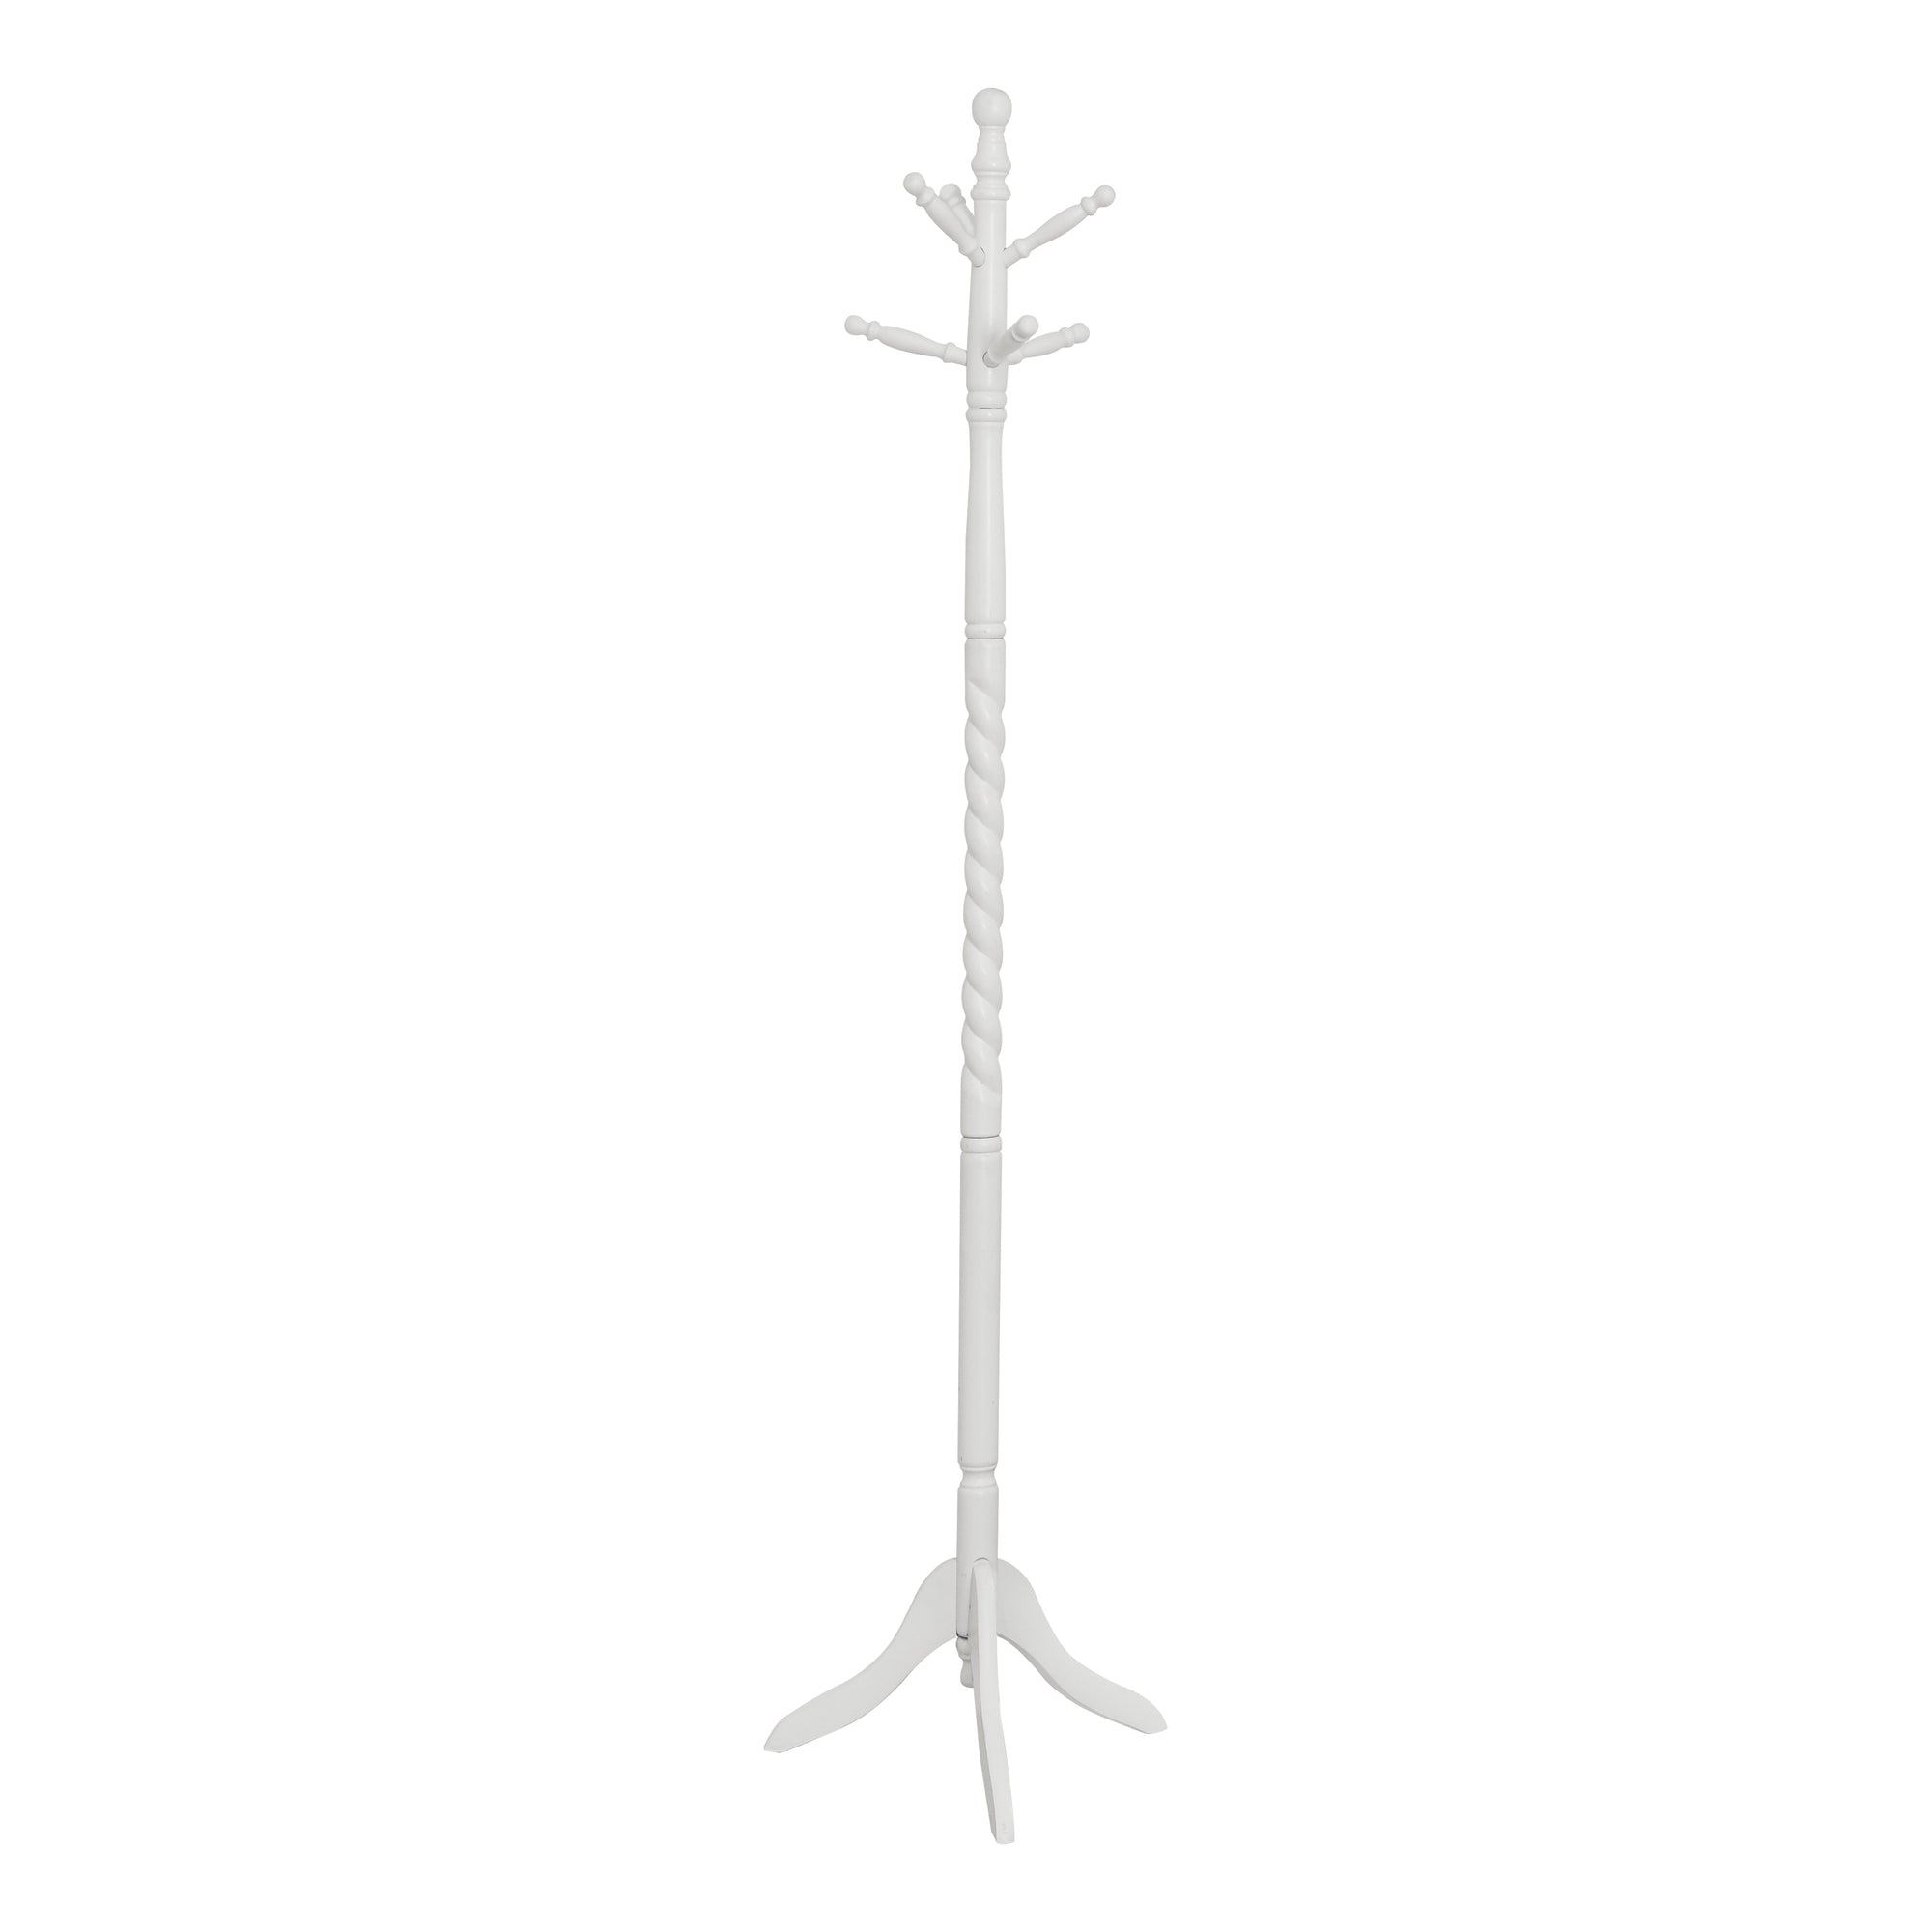 MN-973057    Coat Rack, Hall Tree, Free Standing, 6 Hooks, Entryway, 72"H, Wooden, White, Traditional